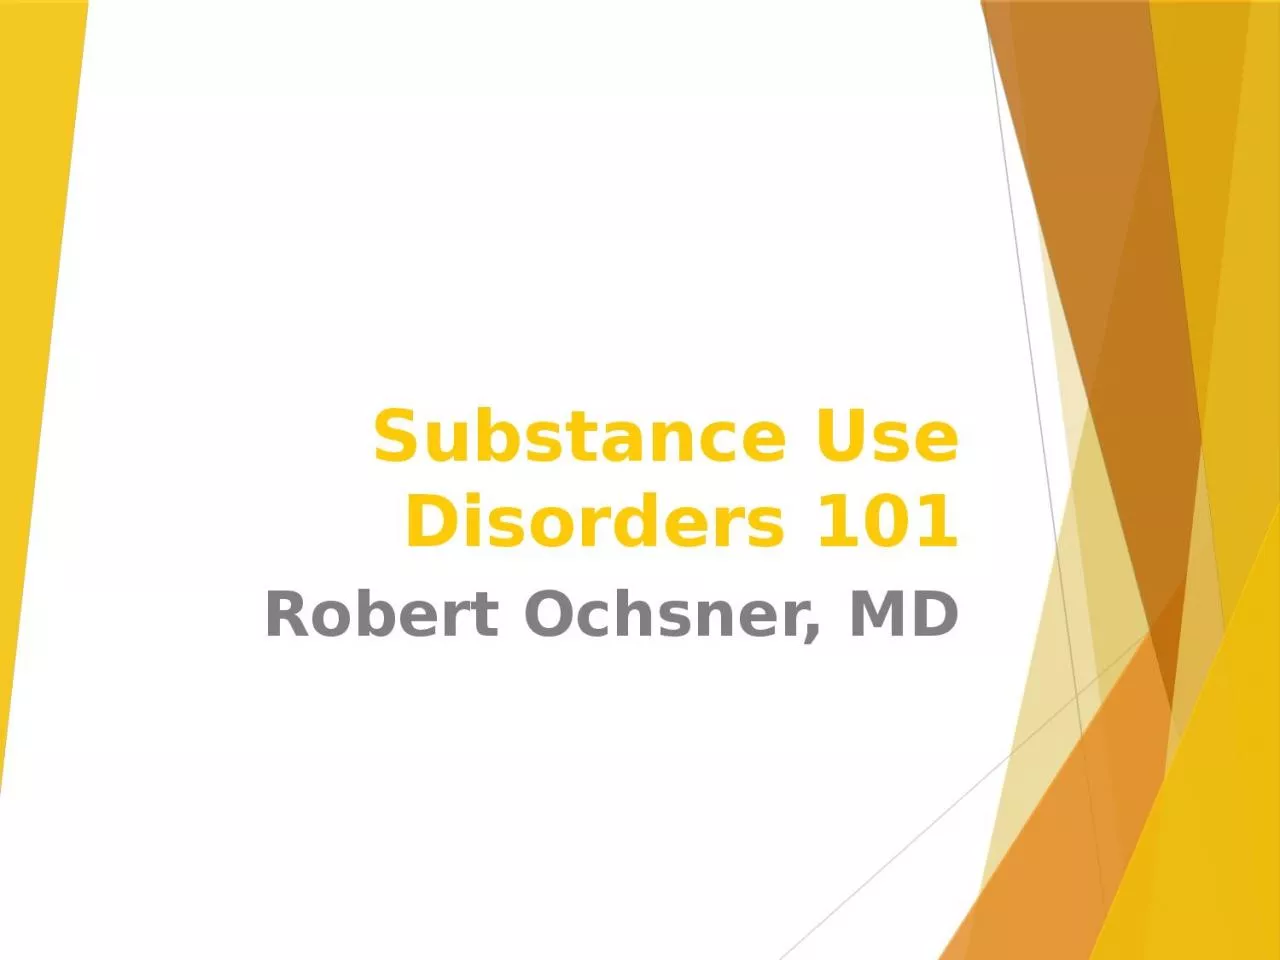 Substance Use Disorders 101